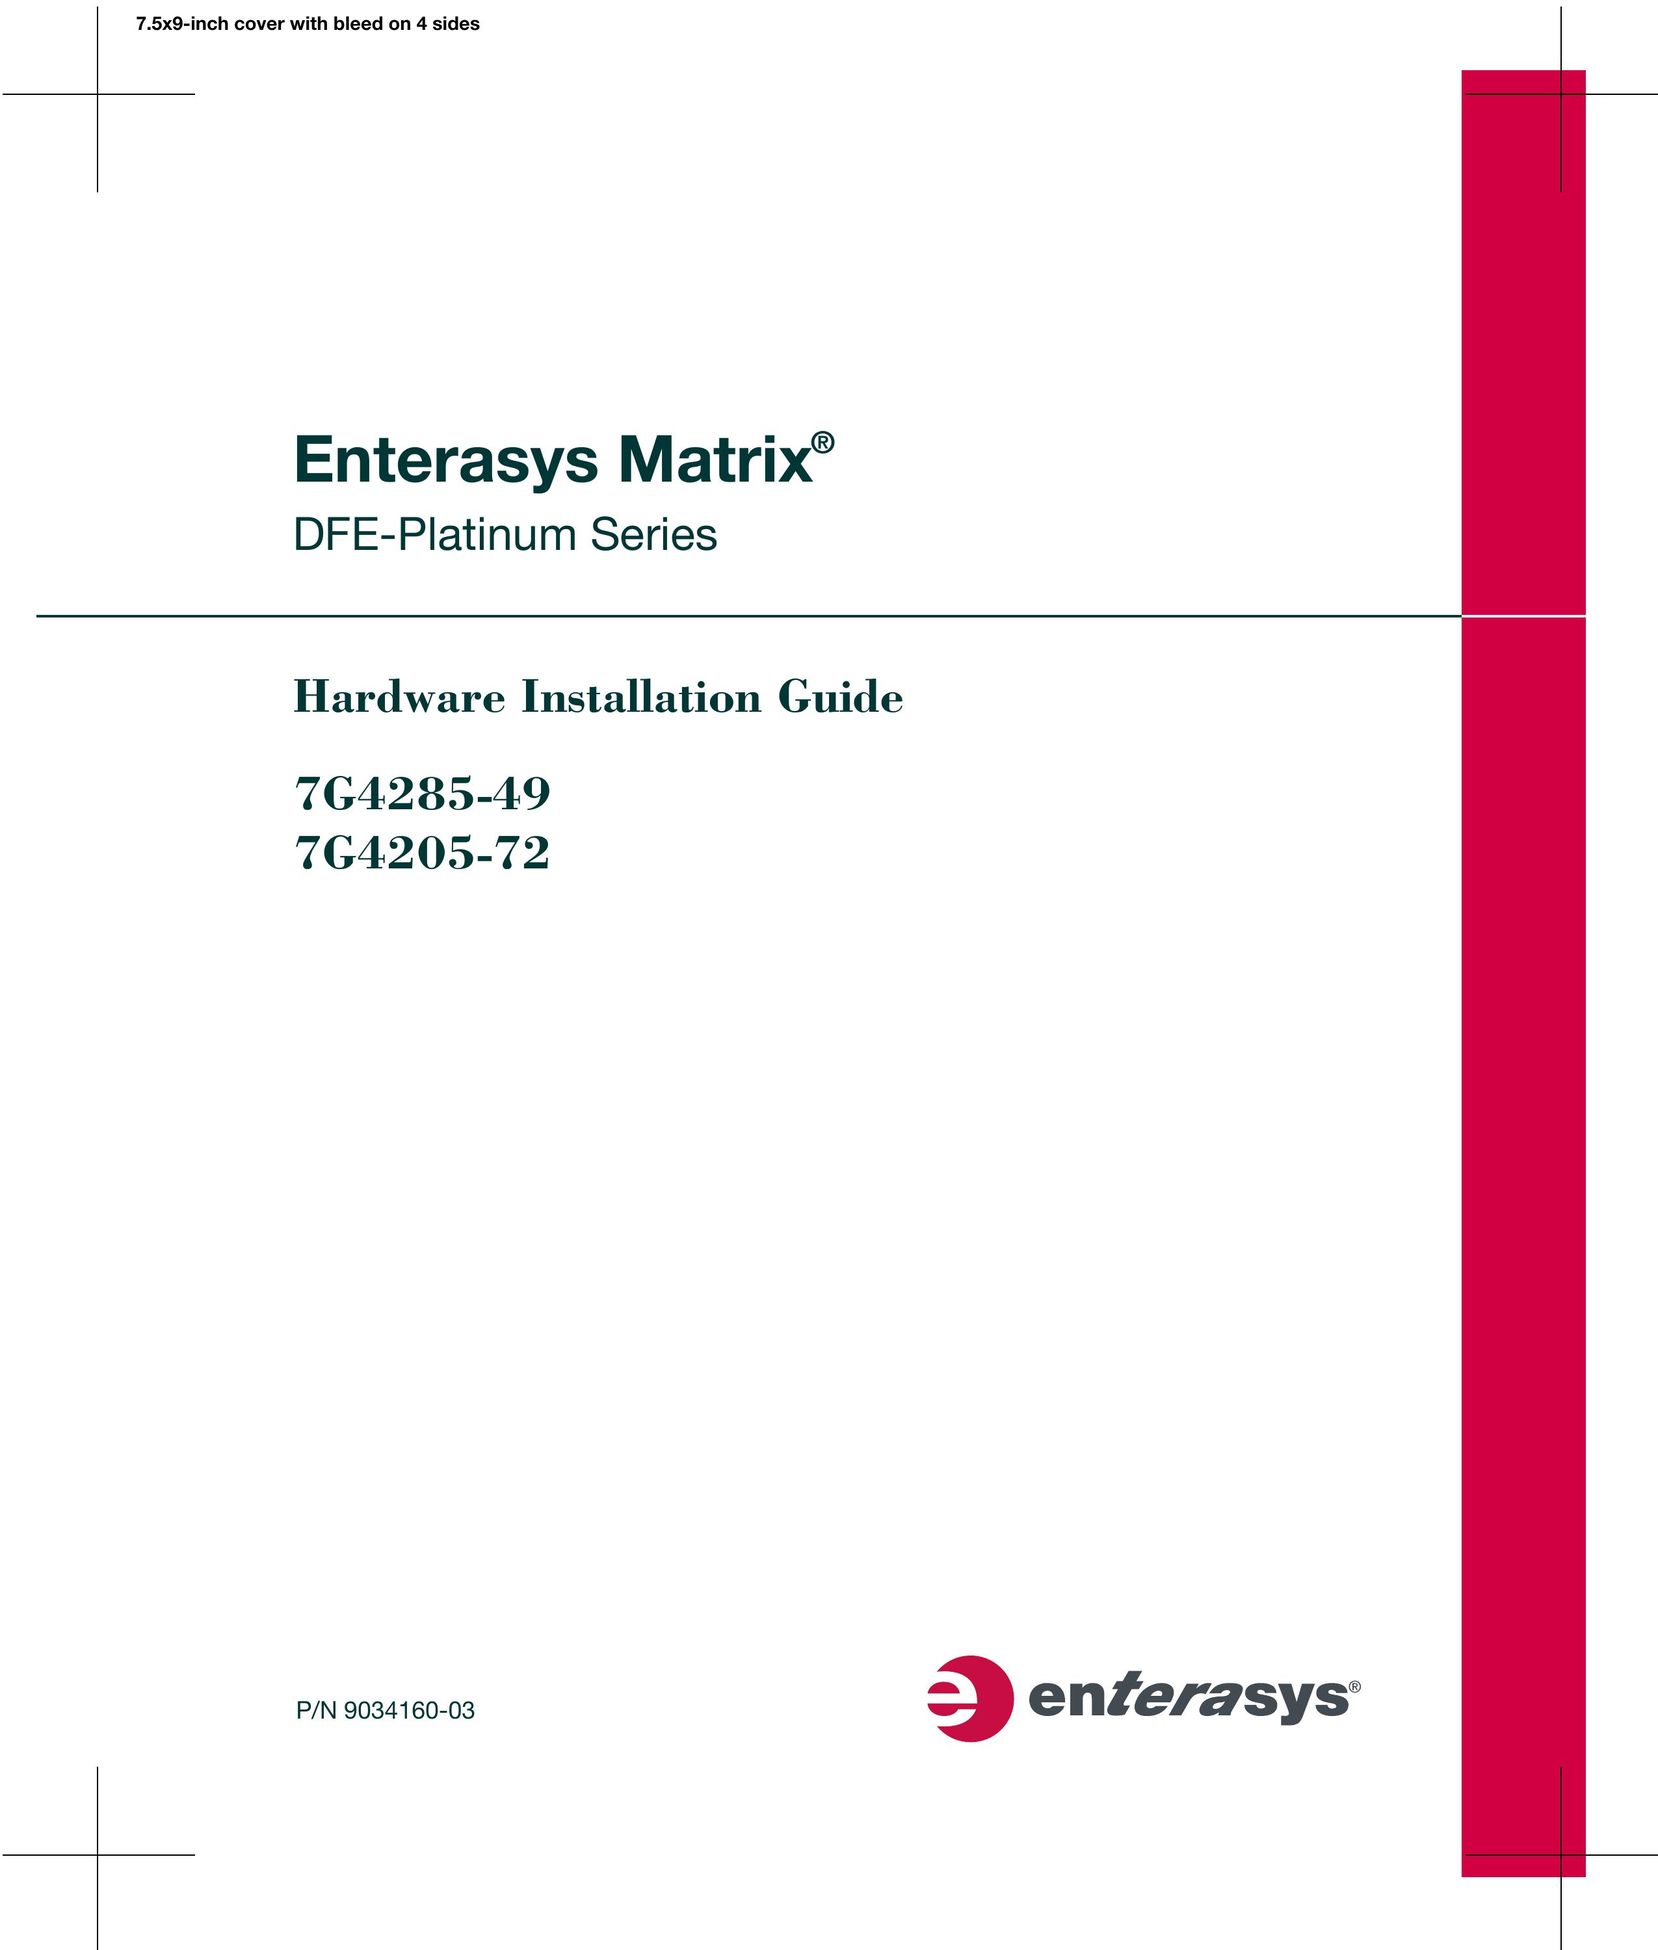 Enterasys Networks 7G4205-72 Switch User Manual